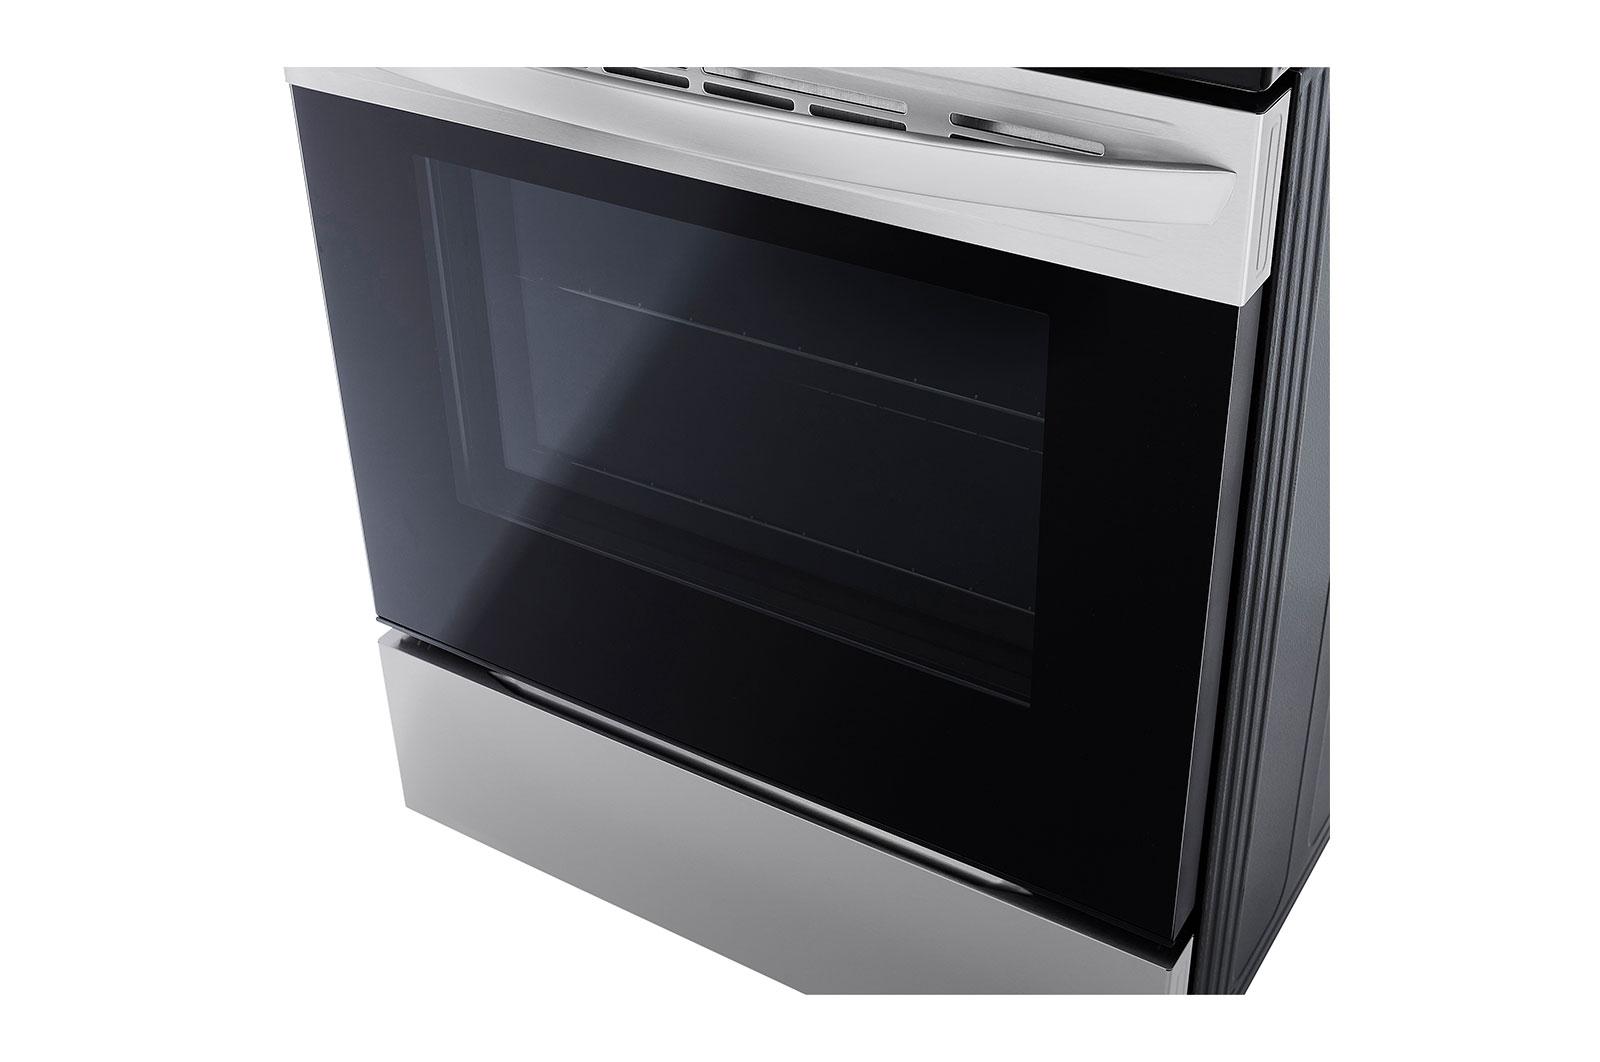 Lg 6.3 cu ft. Smart Wi-Fi Enabled Electric Range with EasyClean®